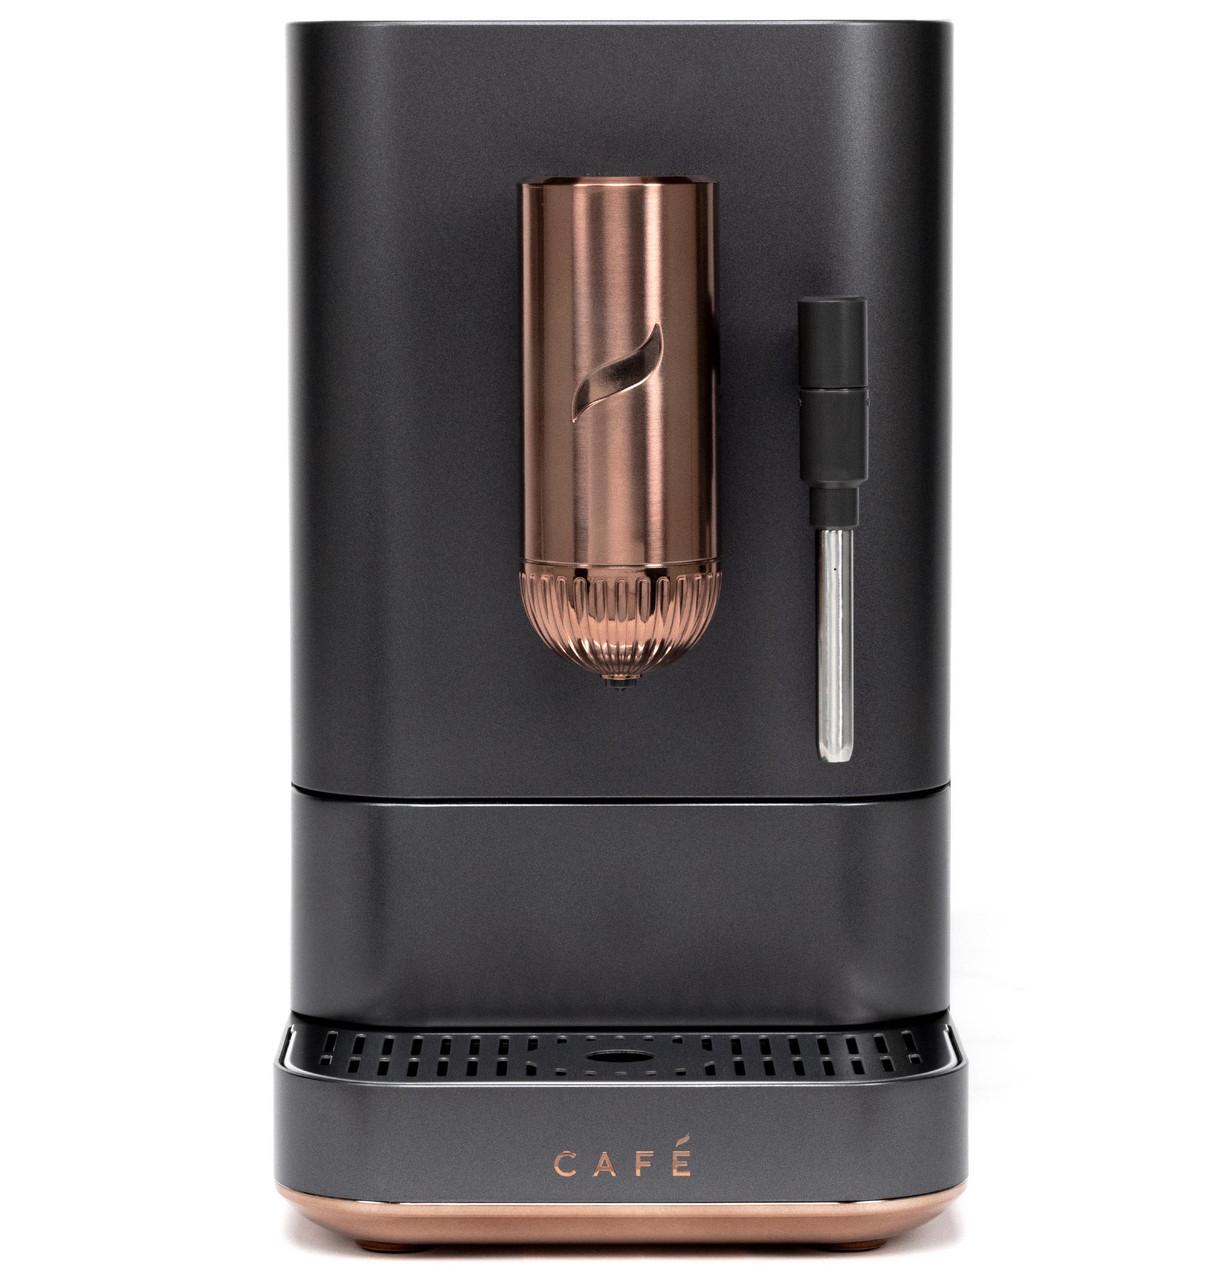 Cafe Caf(eback)™ AFFETTO Automatic Espresso Machine   Frother